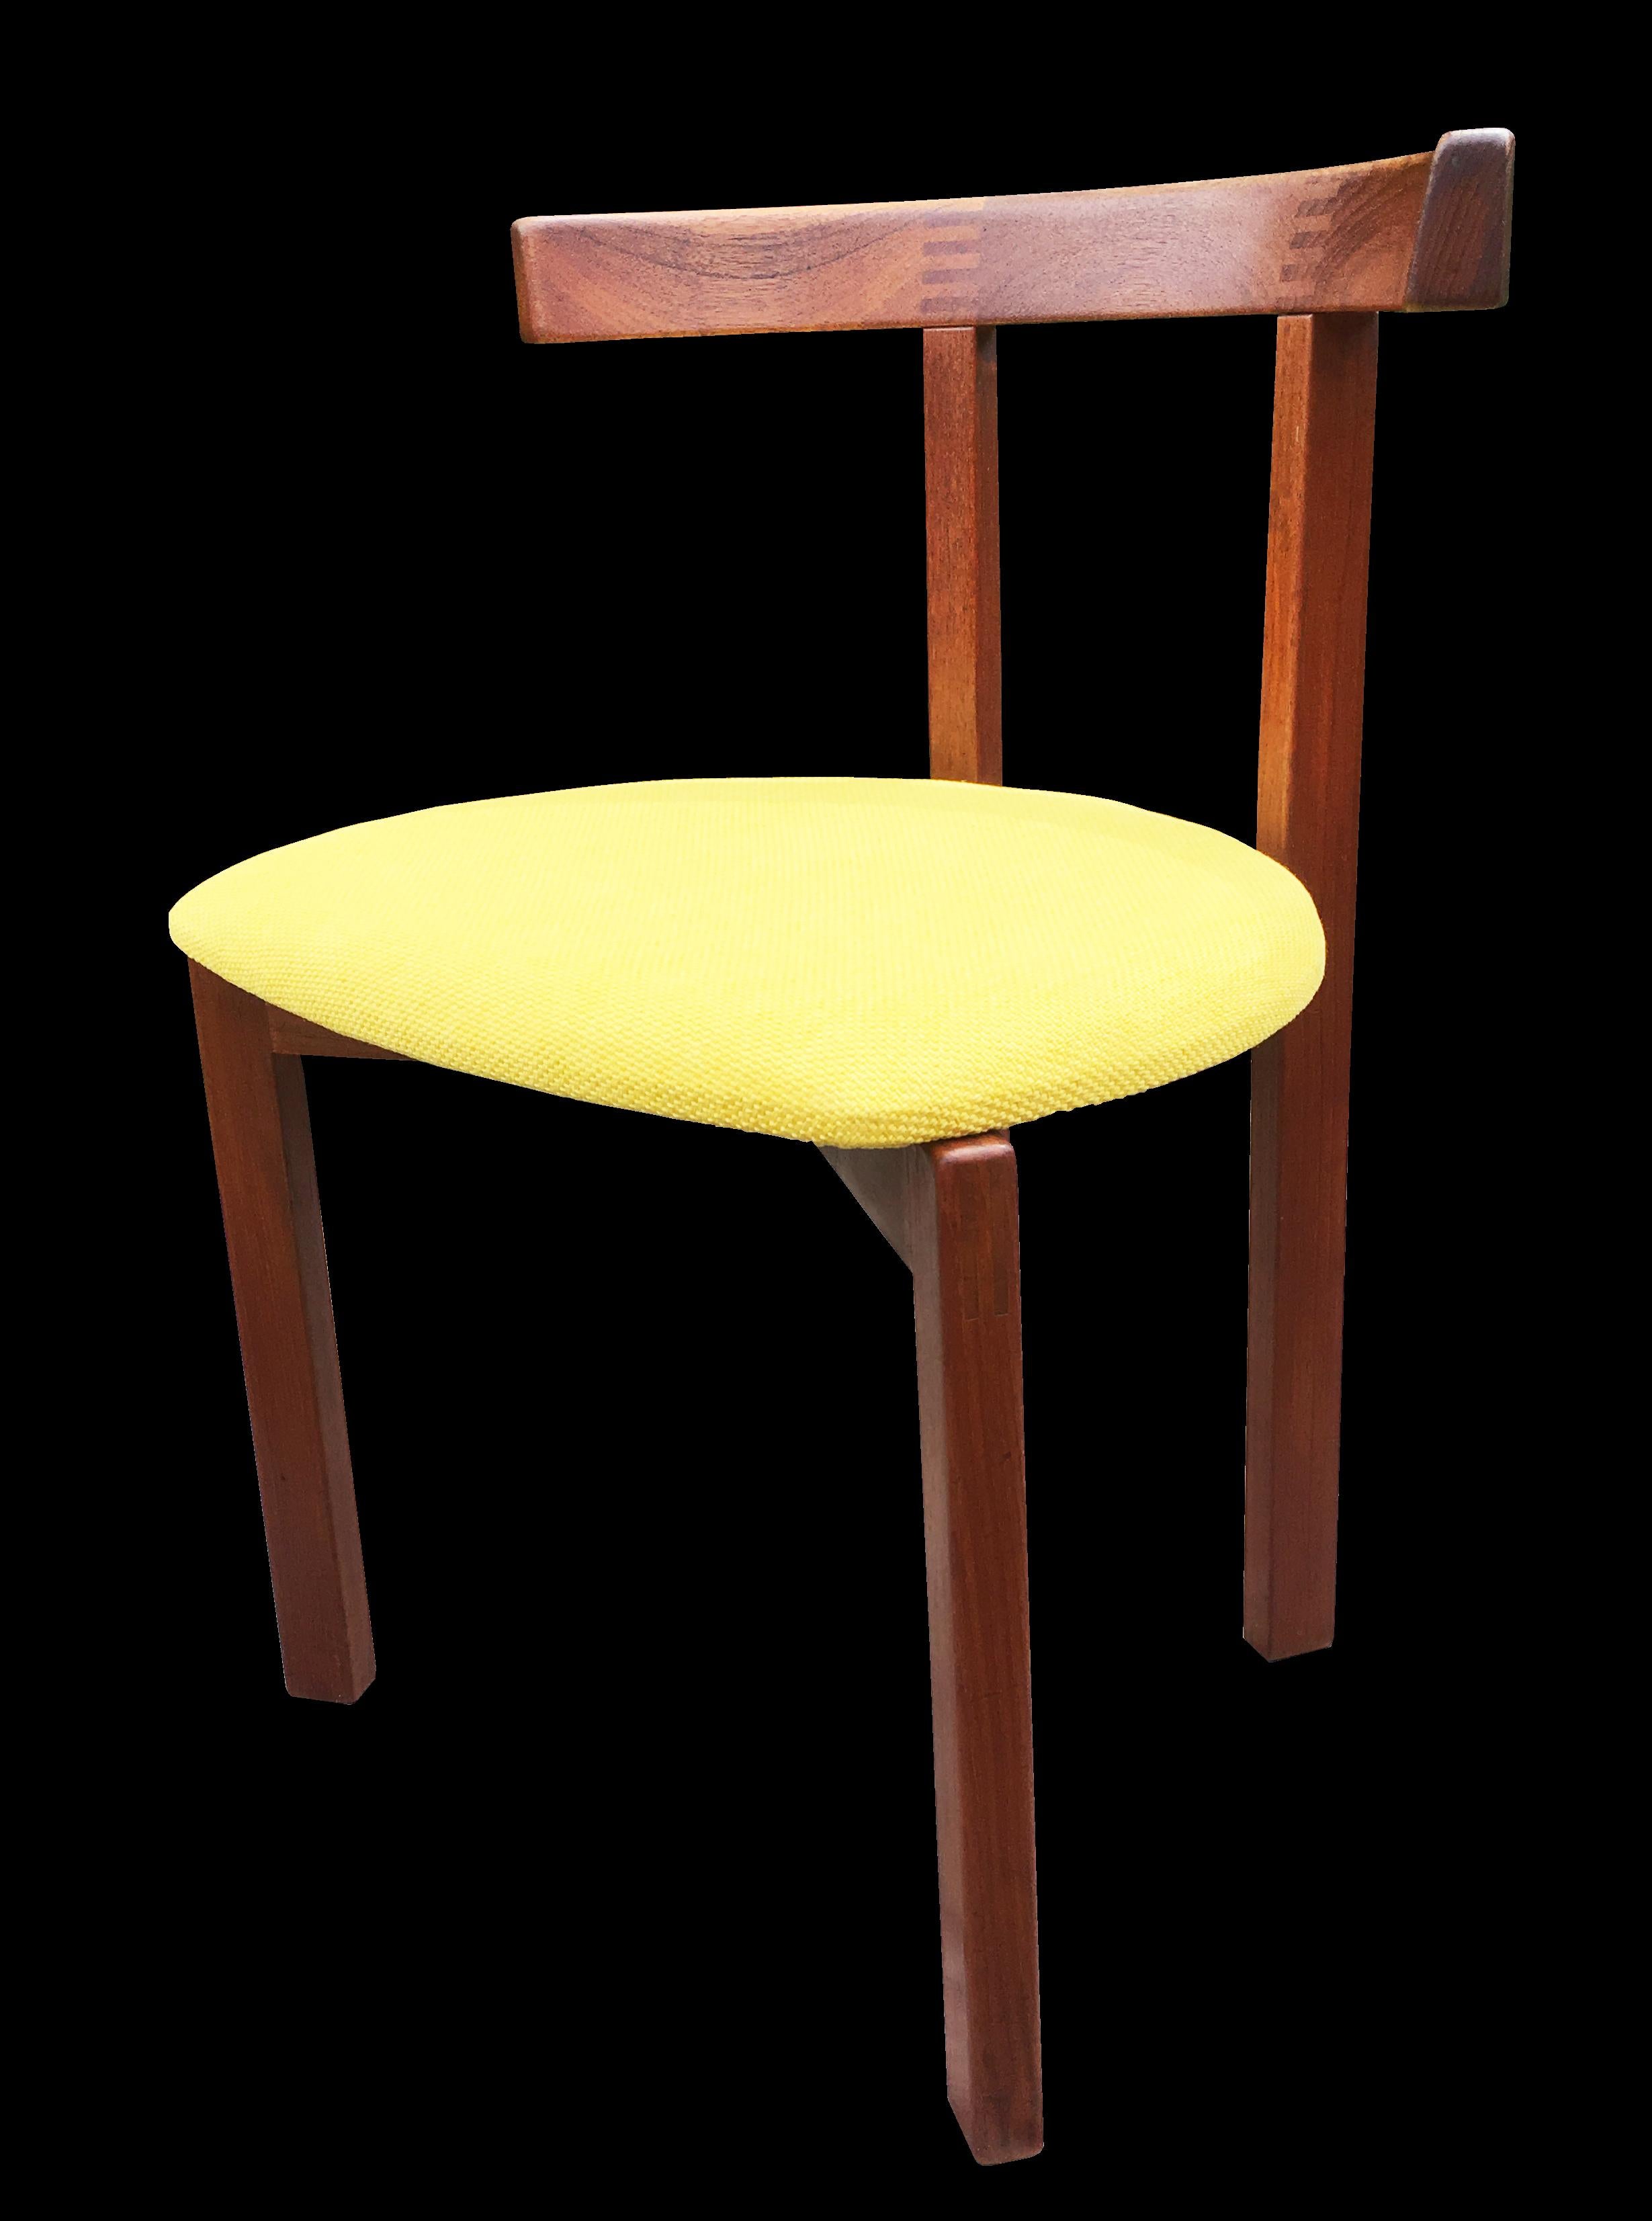 A fine example of this scarce chair, ideal as a desk, side or occasional chair. The wood on this one is in excellent original condition and he seat has been recovered in a nice yellow woollen fabric.